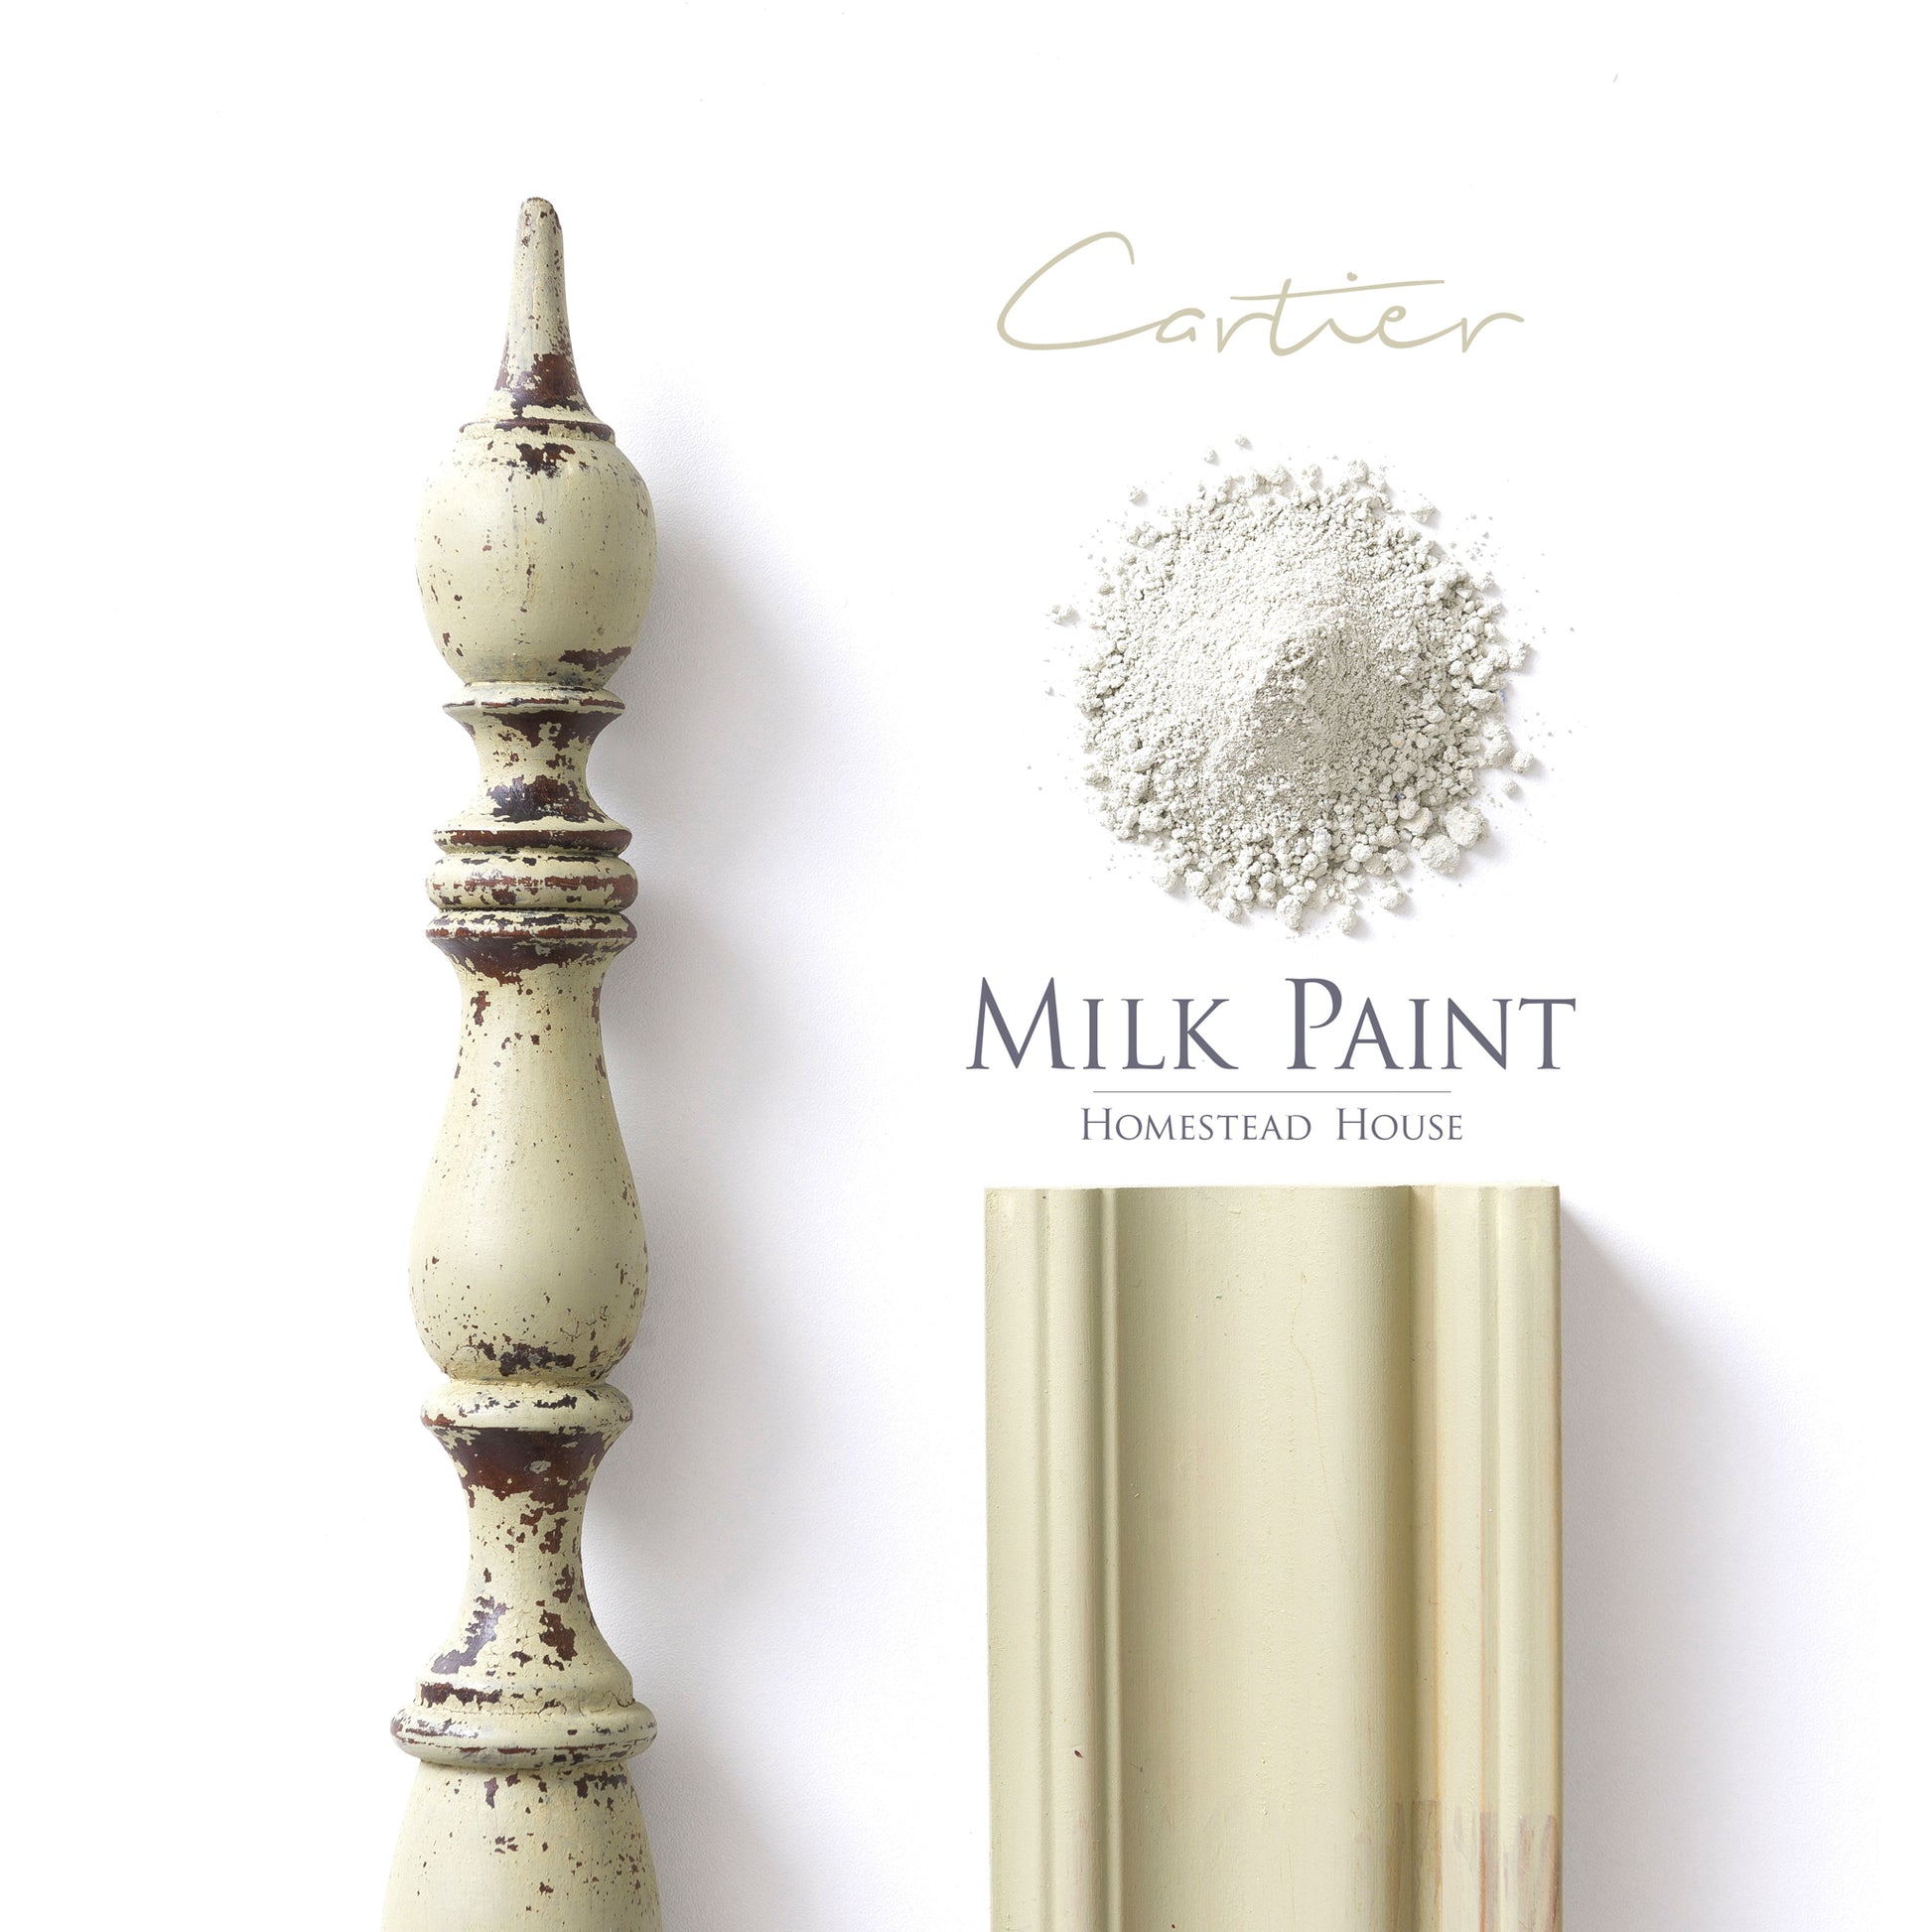 Milk Paint from Homestead House in Cartier, A light sage green with a slight hint of a muted mustard yellow. | homesteadhouse.ca